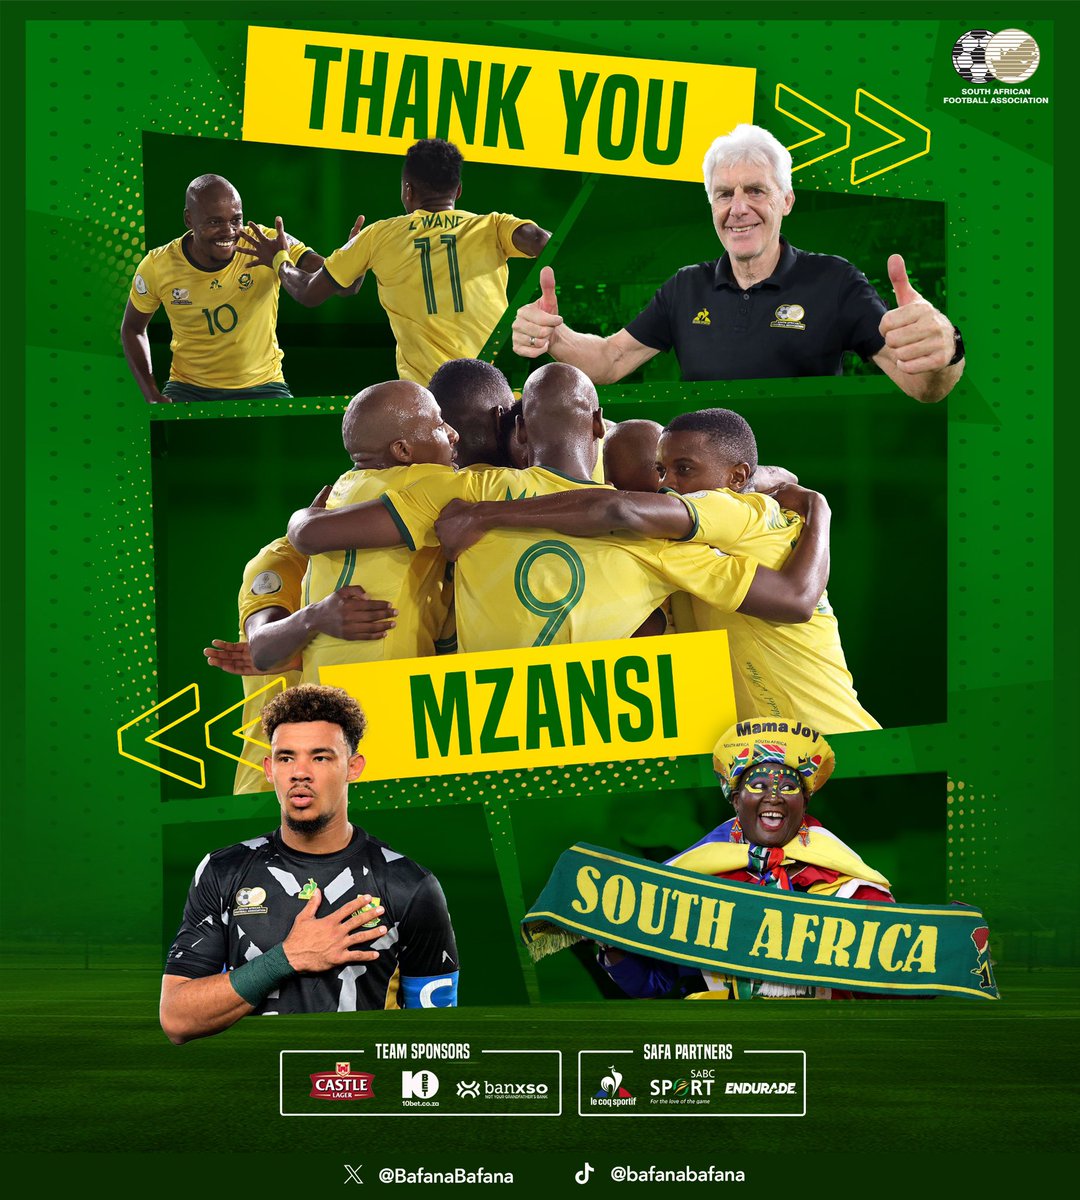 Well done to Nigeria 🇳🇬 for making it to the final of AFCON 2023 South Africa 🇿🇦 Thank you so much for your unwavering support for @BafanaBafana throughout this tournament.